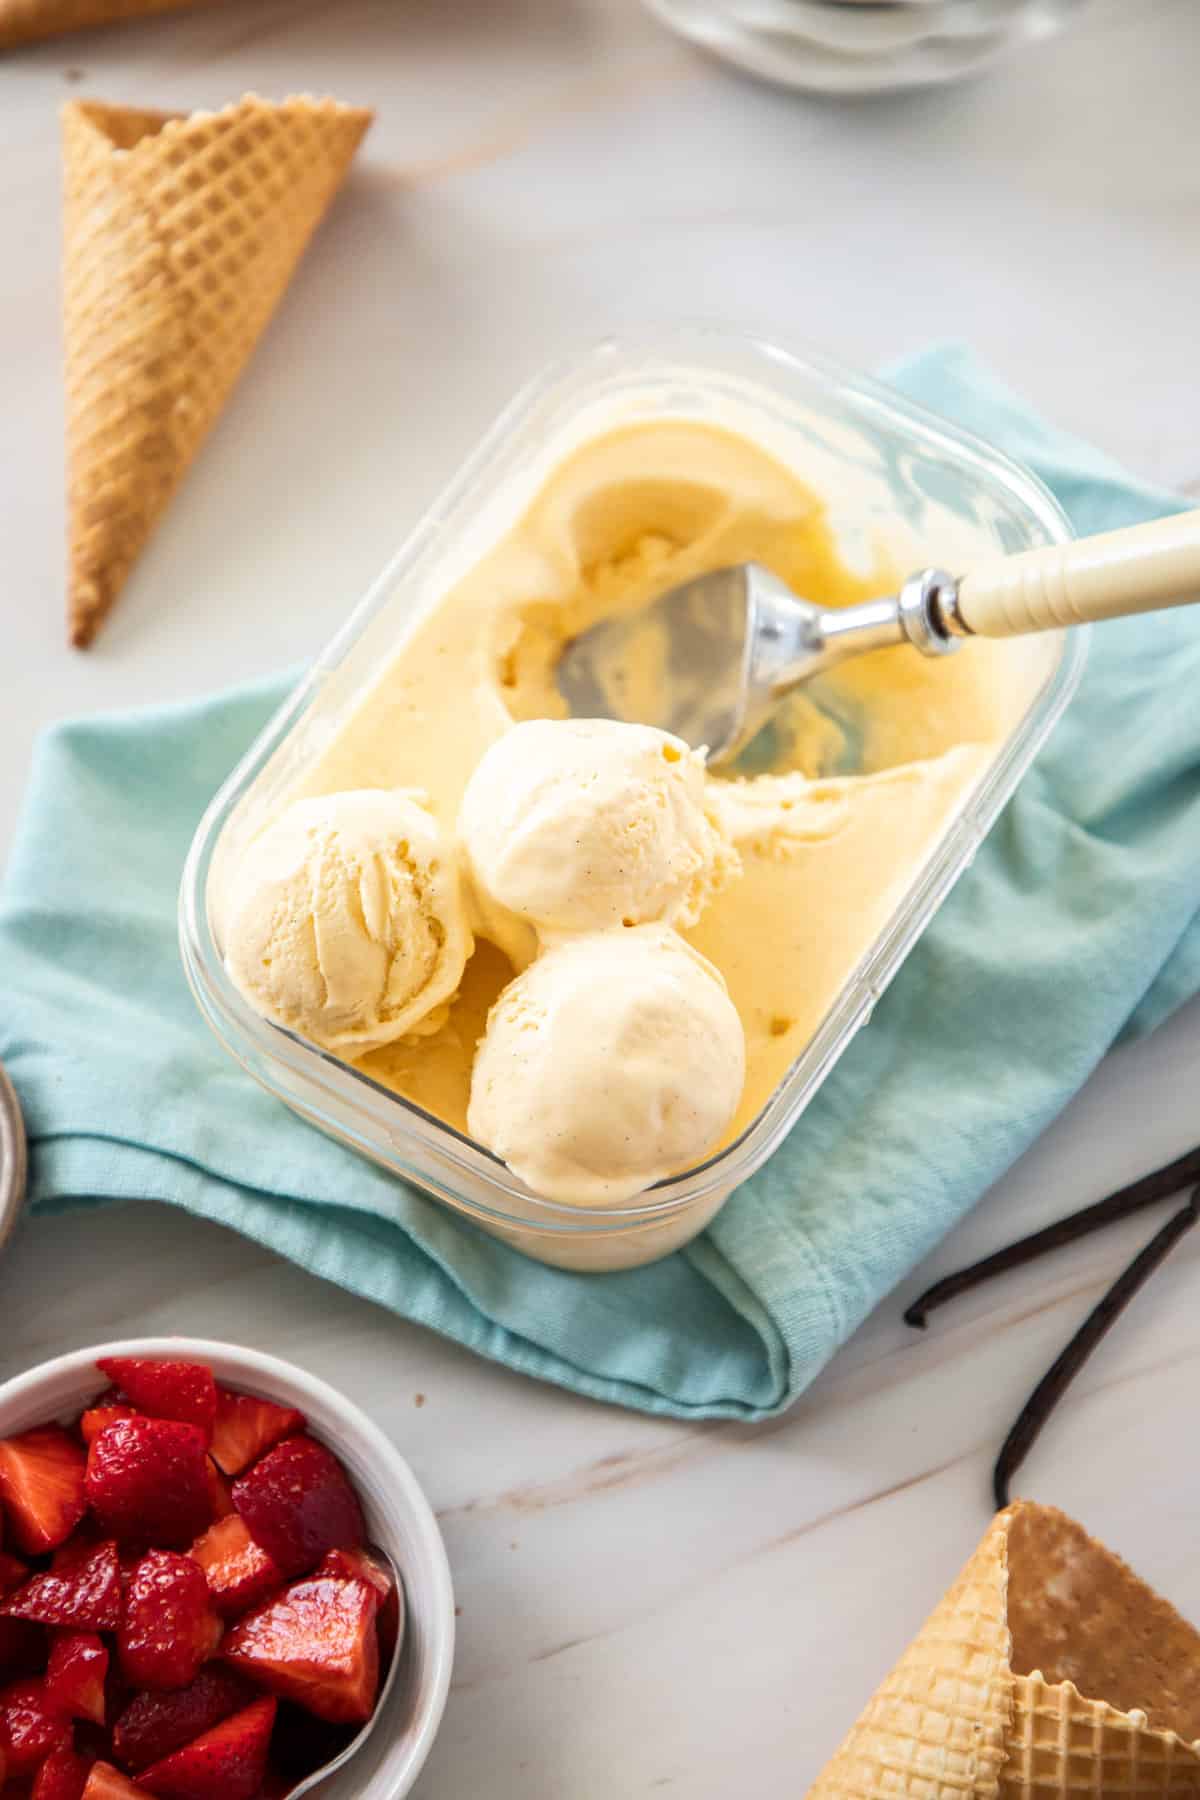 container of ice cream, with some balls scooped out, with some ice cream cones and a bowl of strawberries on the edge.